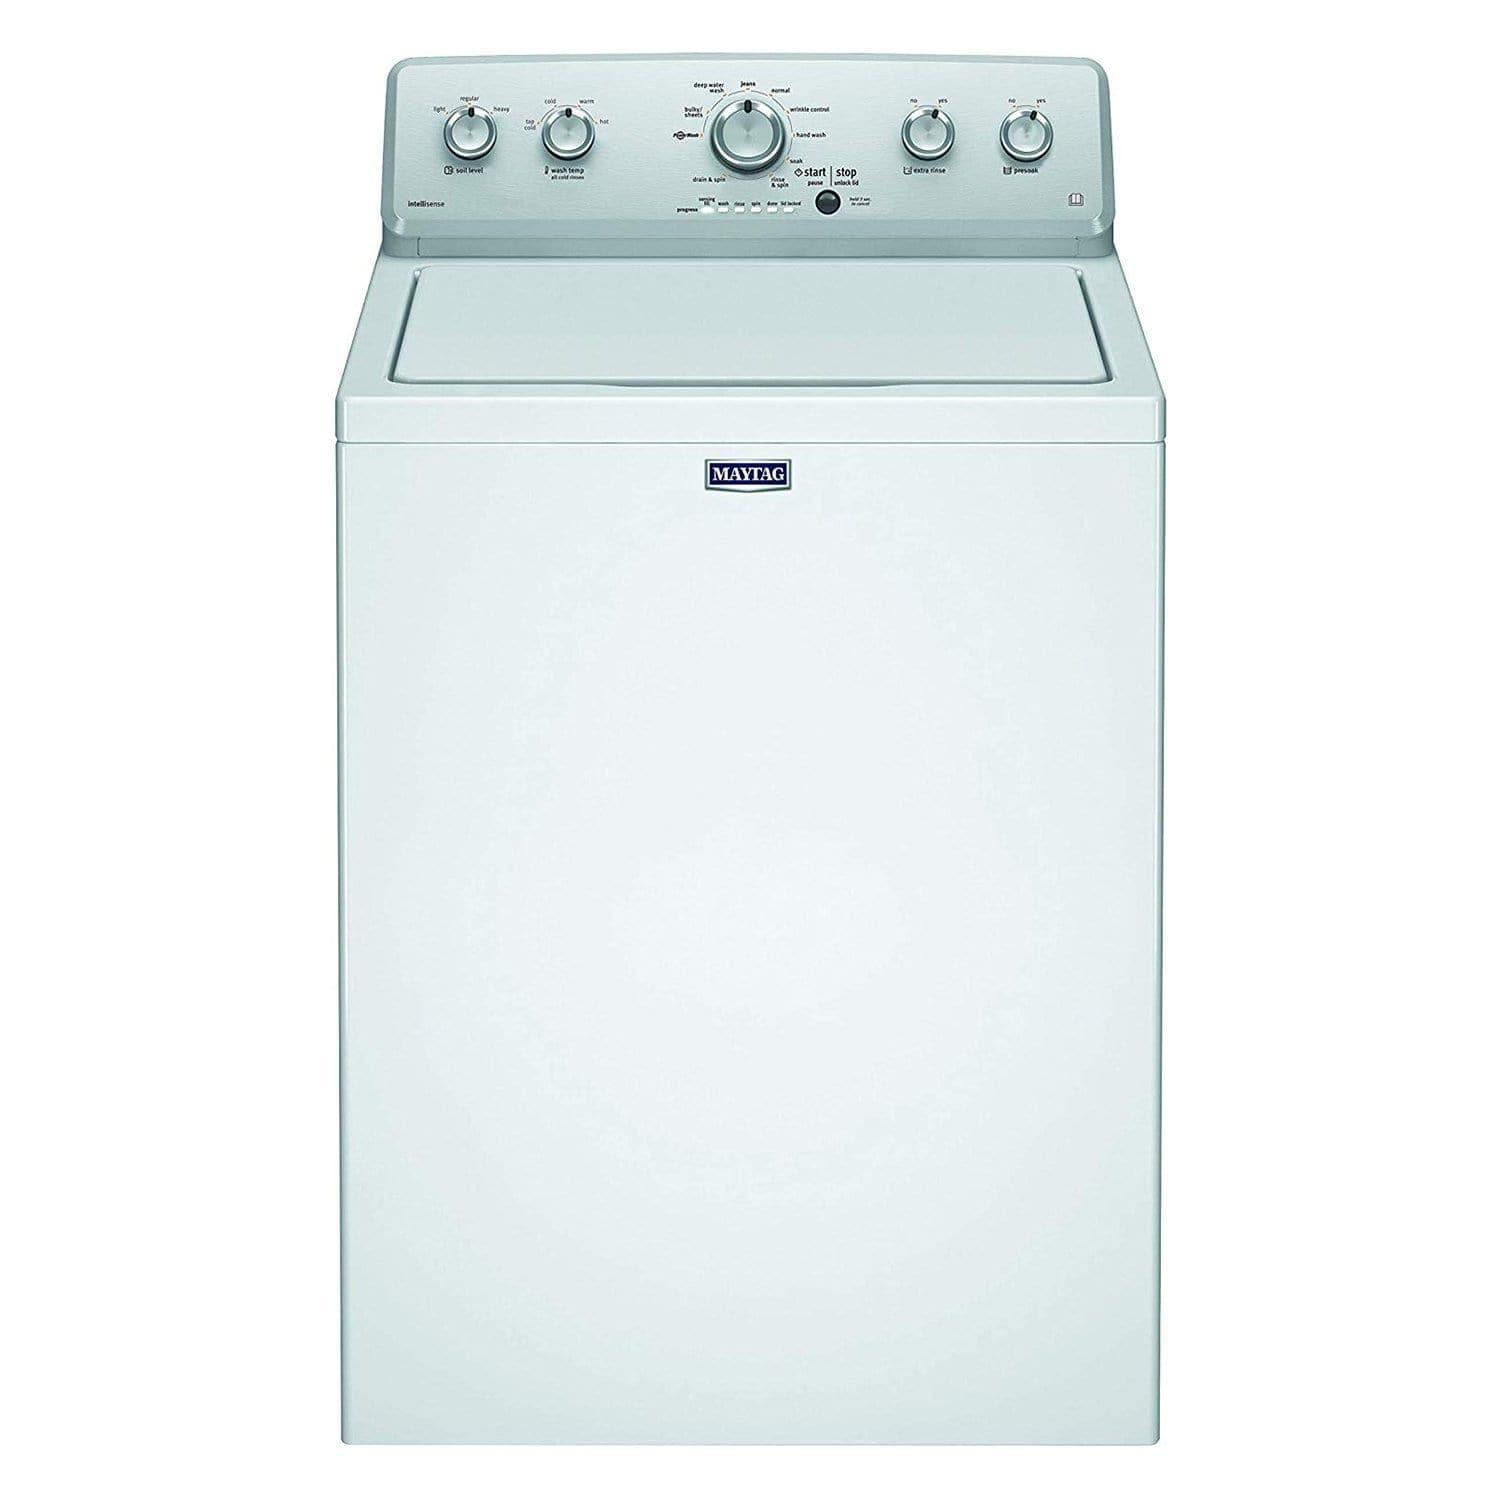 Maytag Top Load Fully Automatic Washing Machine - White - 3LMVWC415FW